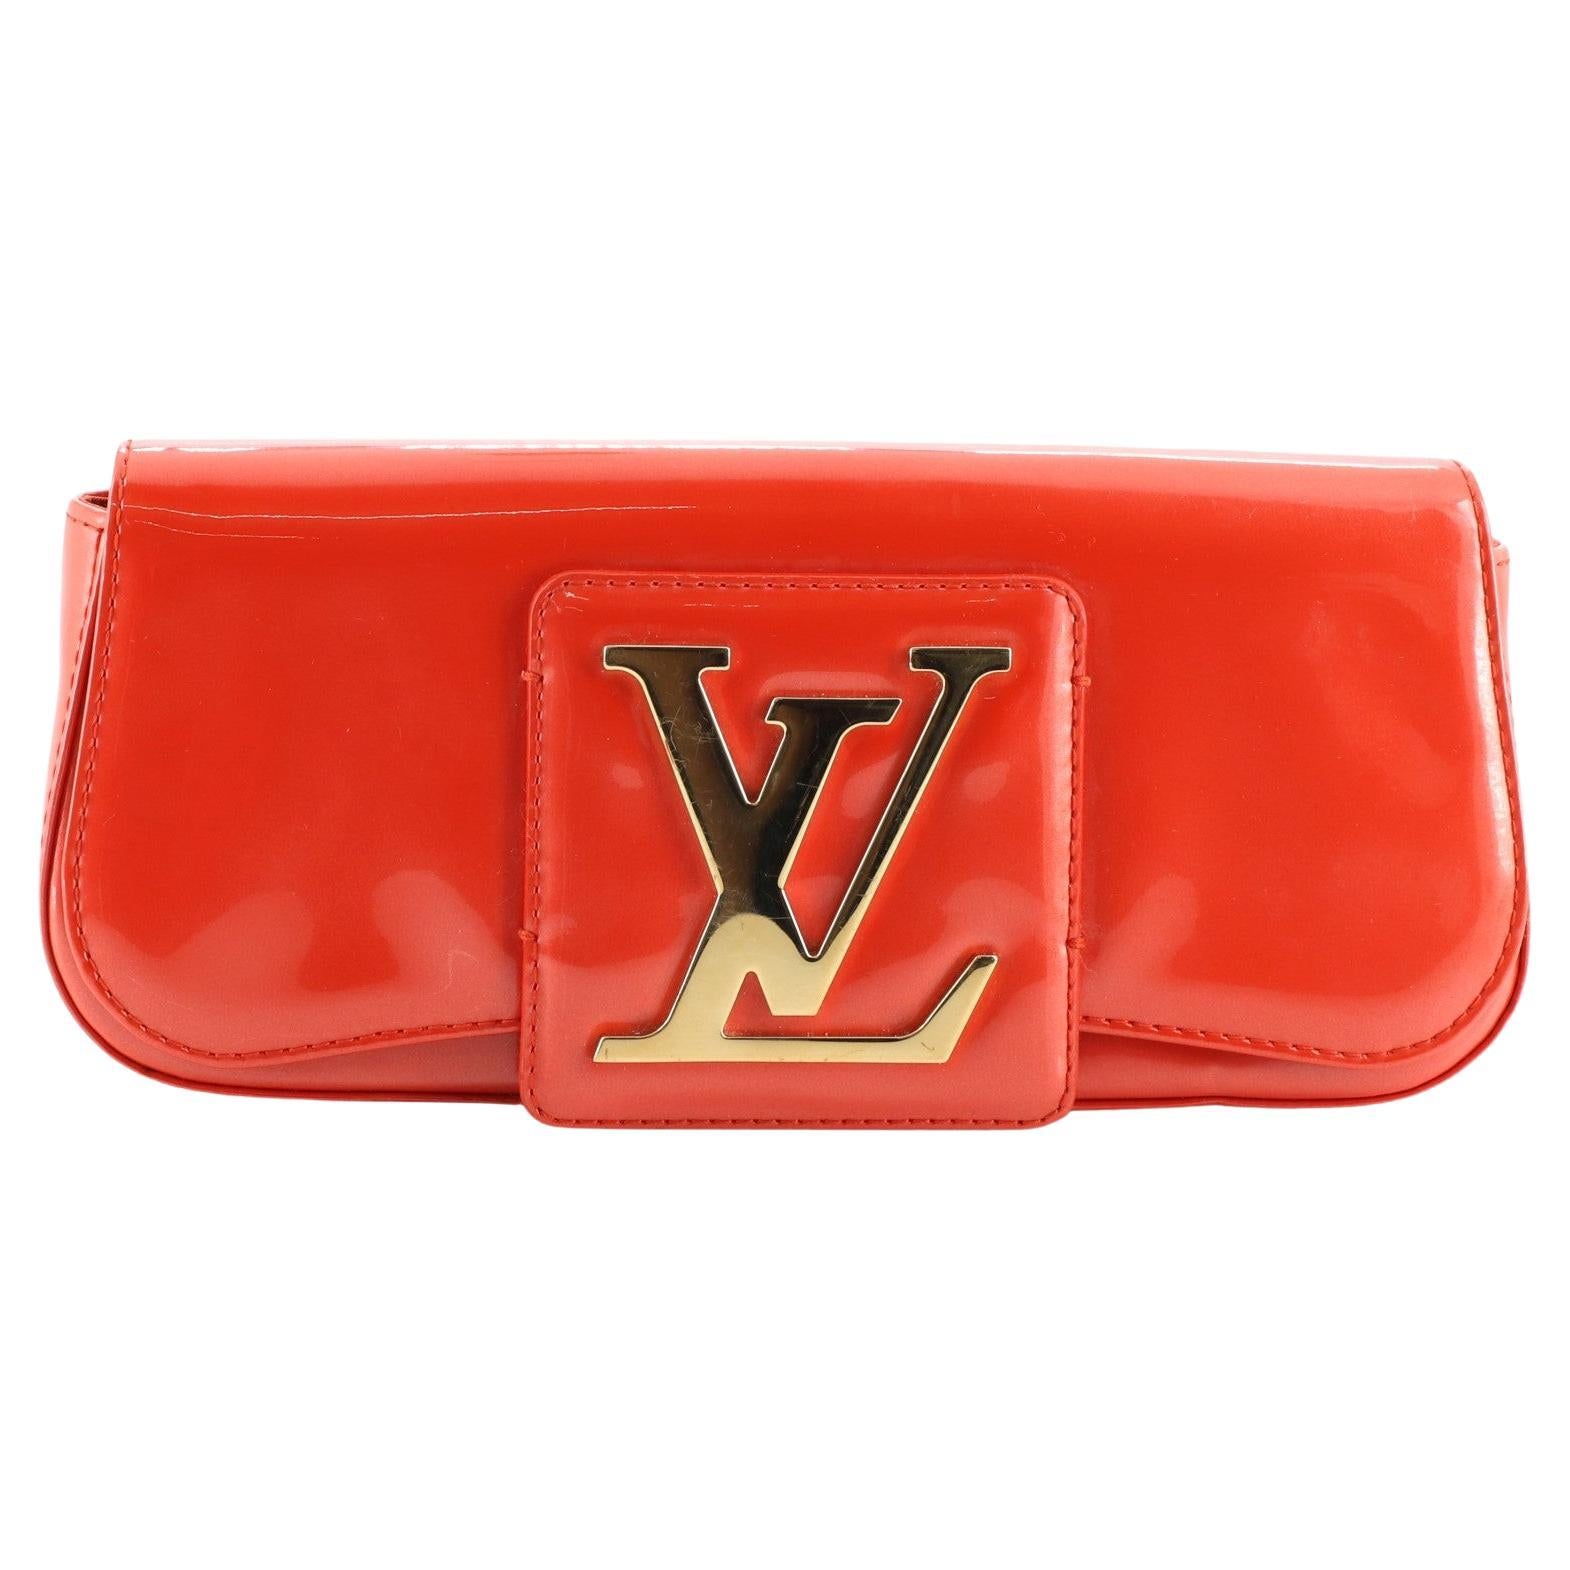 Louis Vuitton Magenta Vernis Leather Louise Clutch at 1stDibs